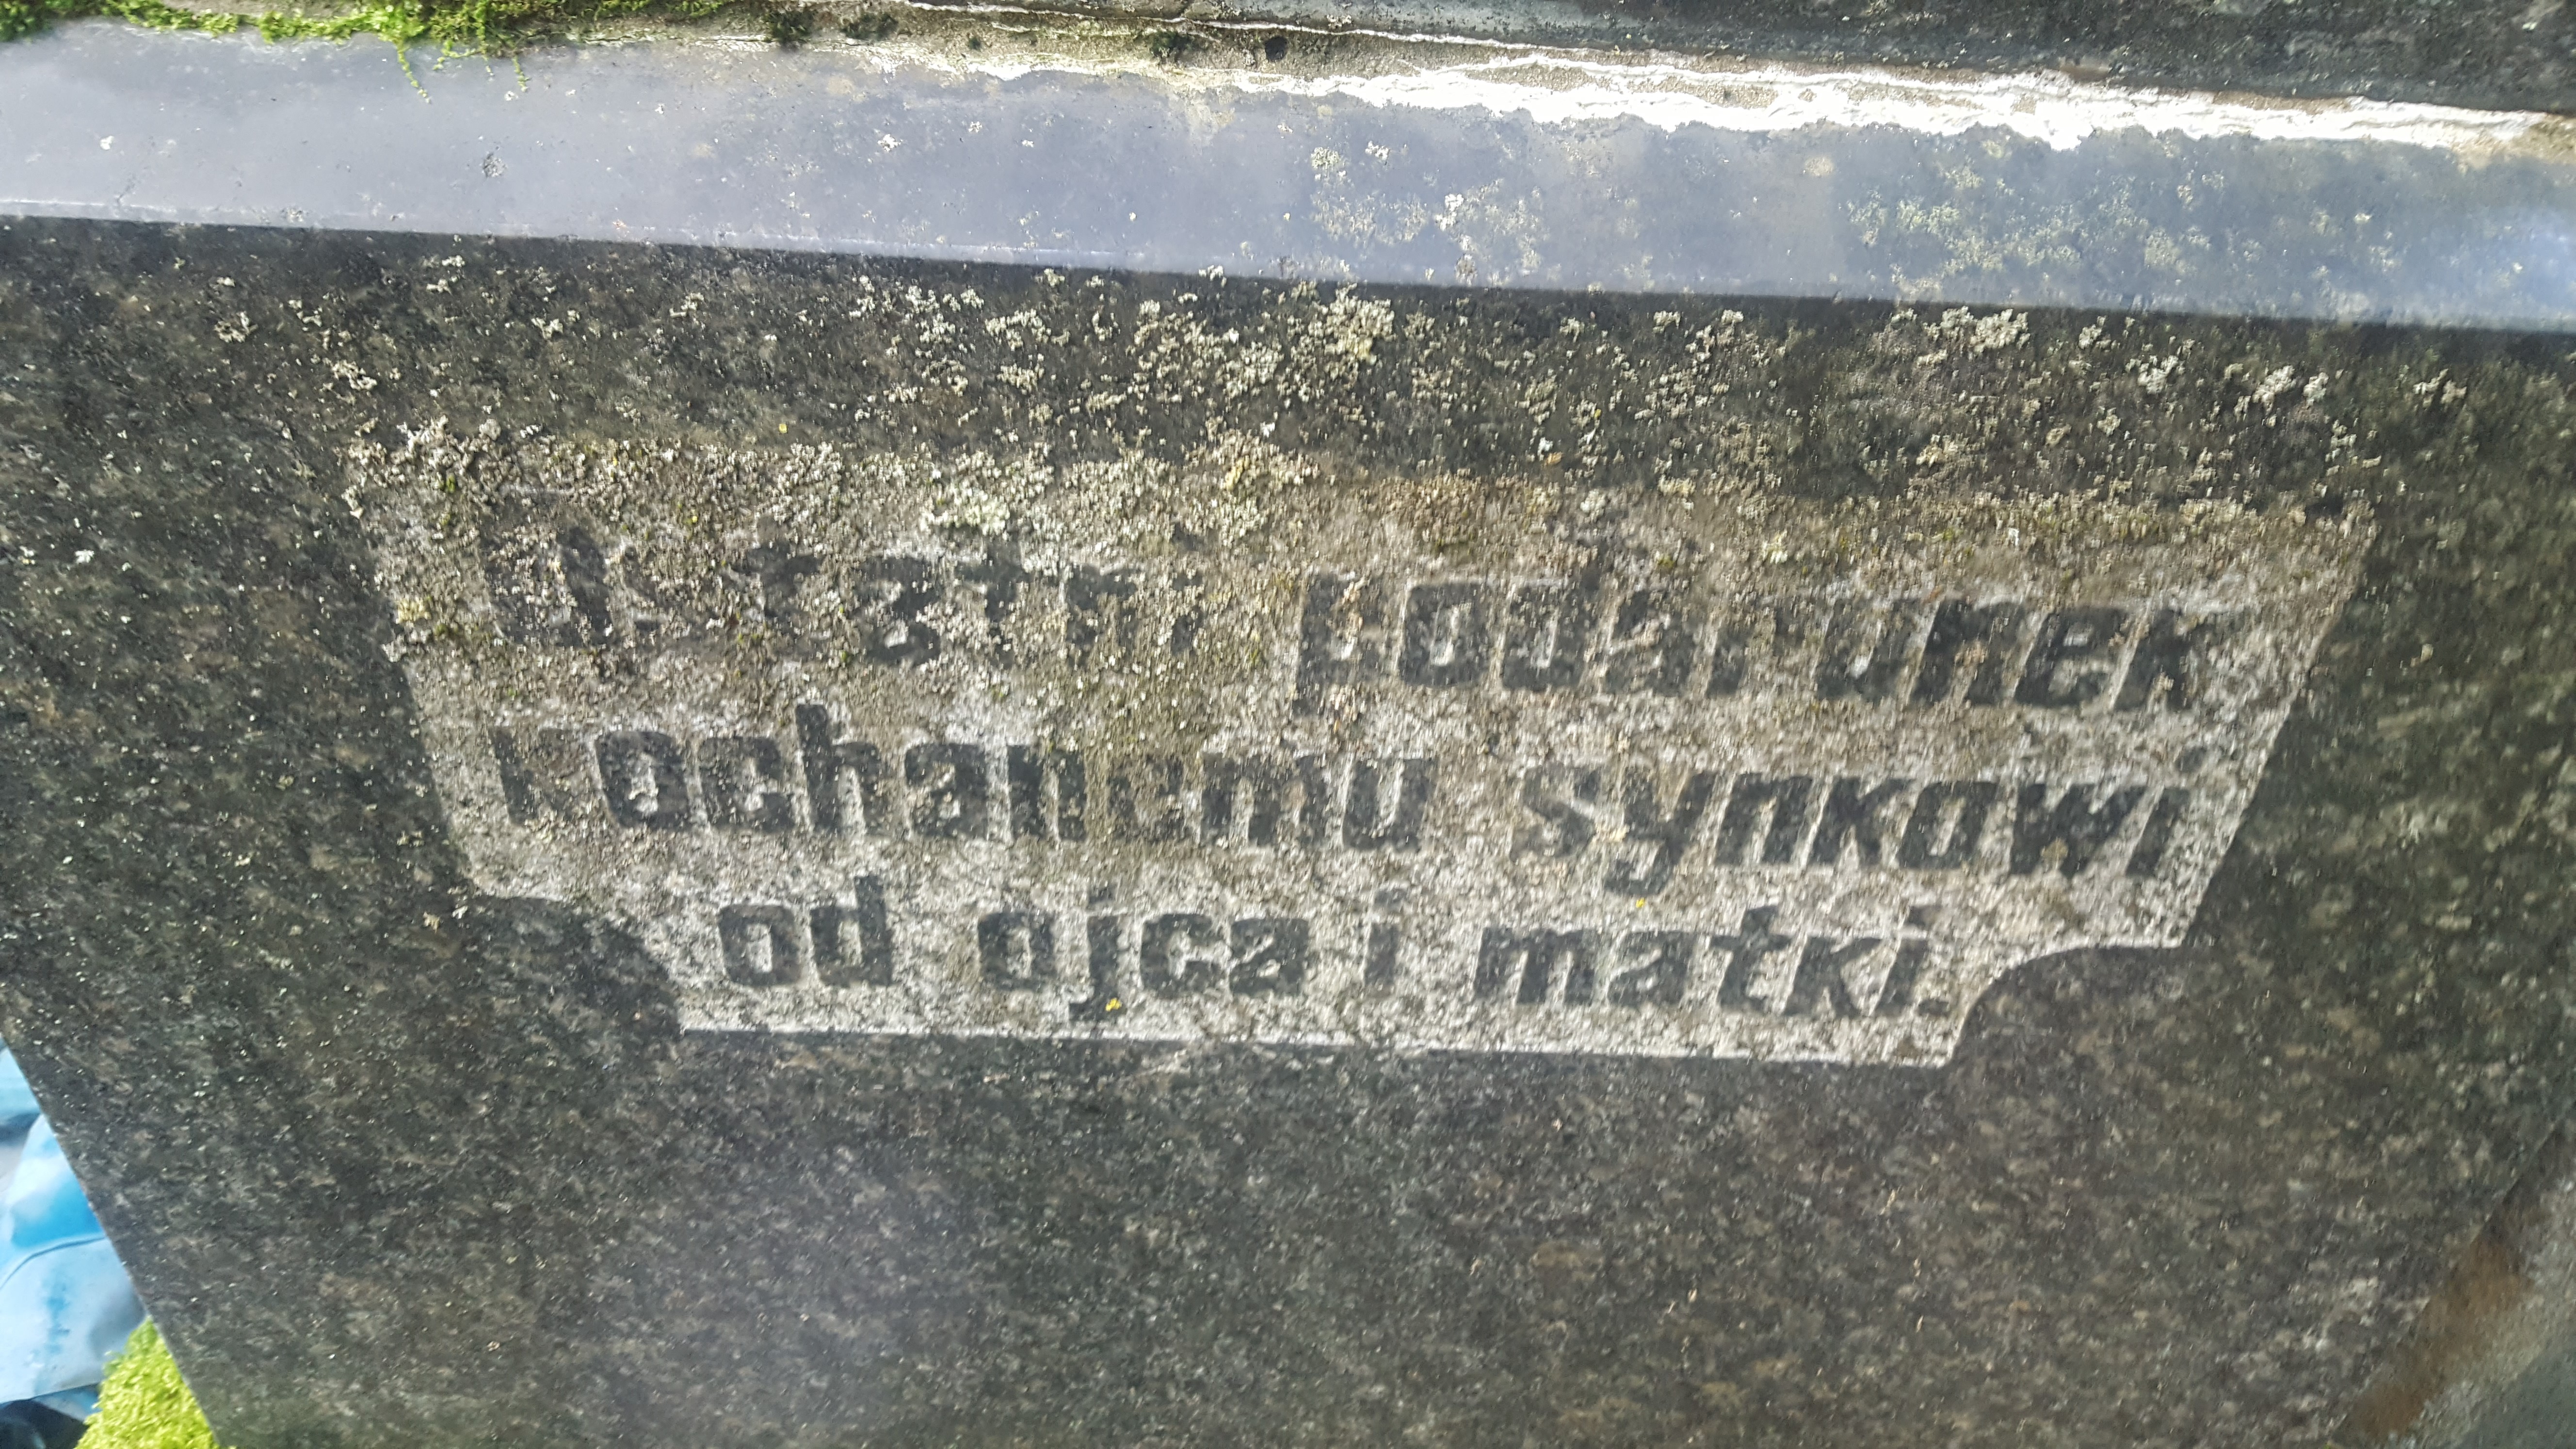 Inscription from the tombstone of Alexander Kuznetsov, St Michael's cemetery in Riga, as of 2021.